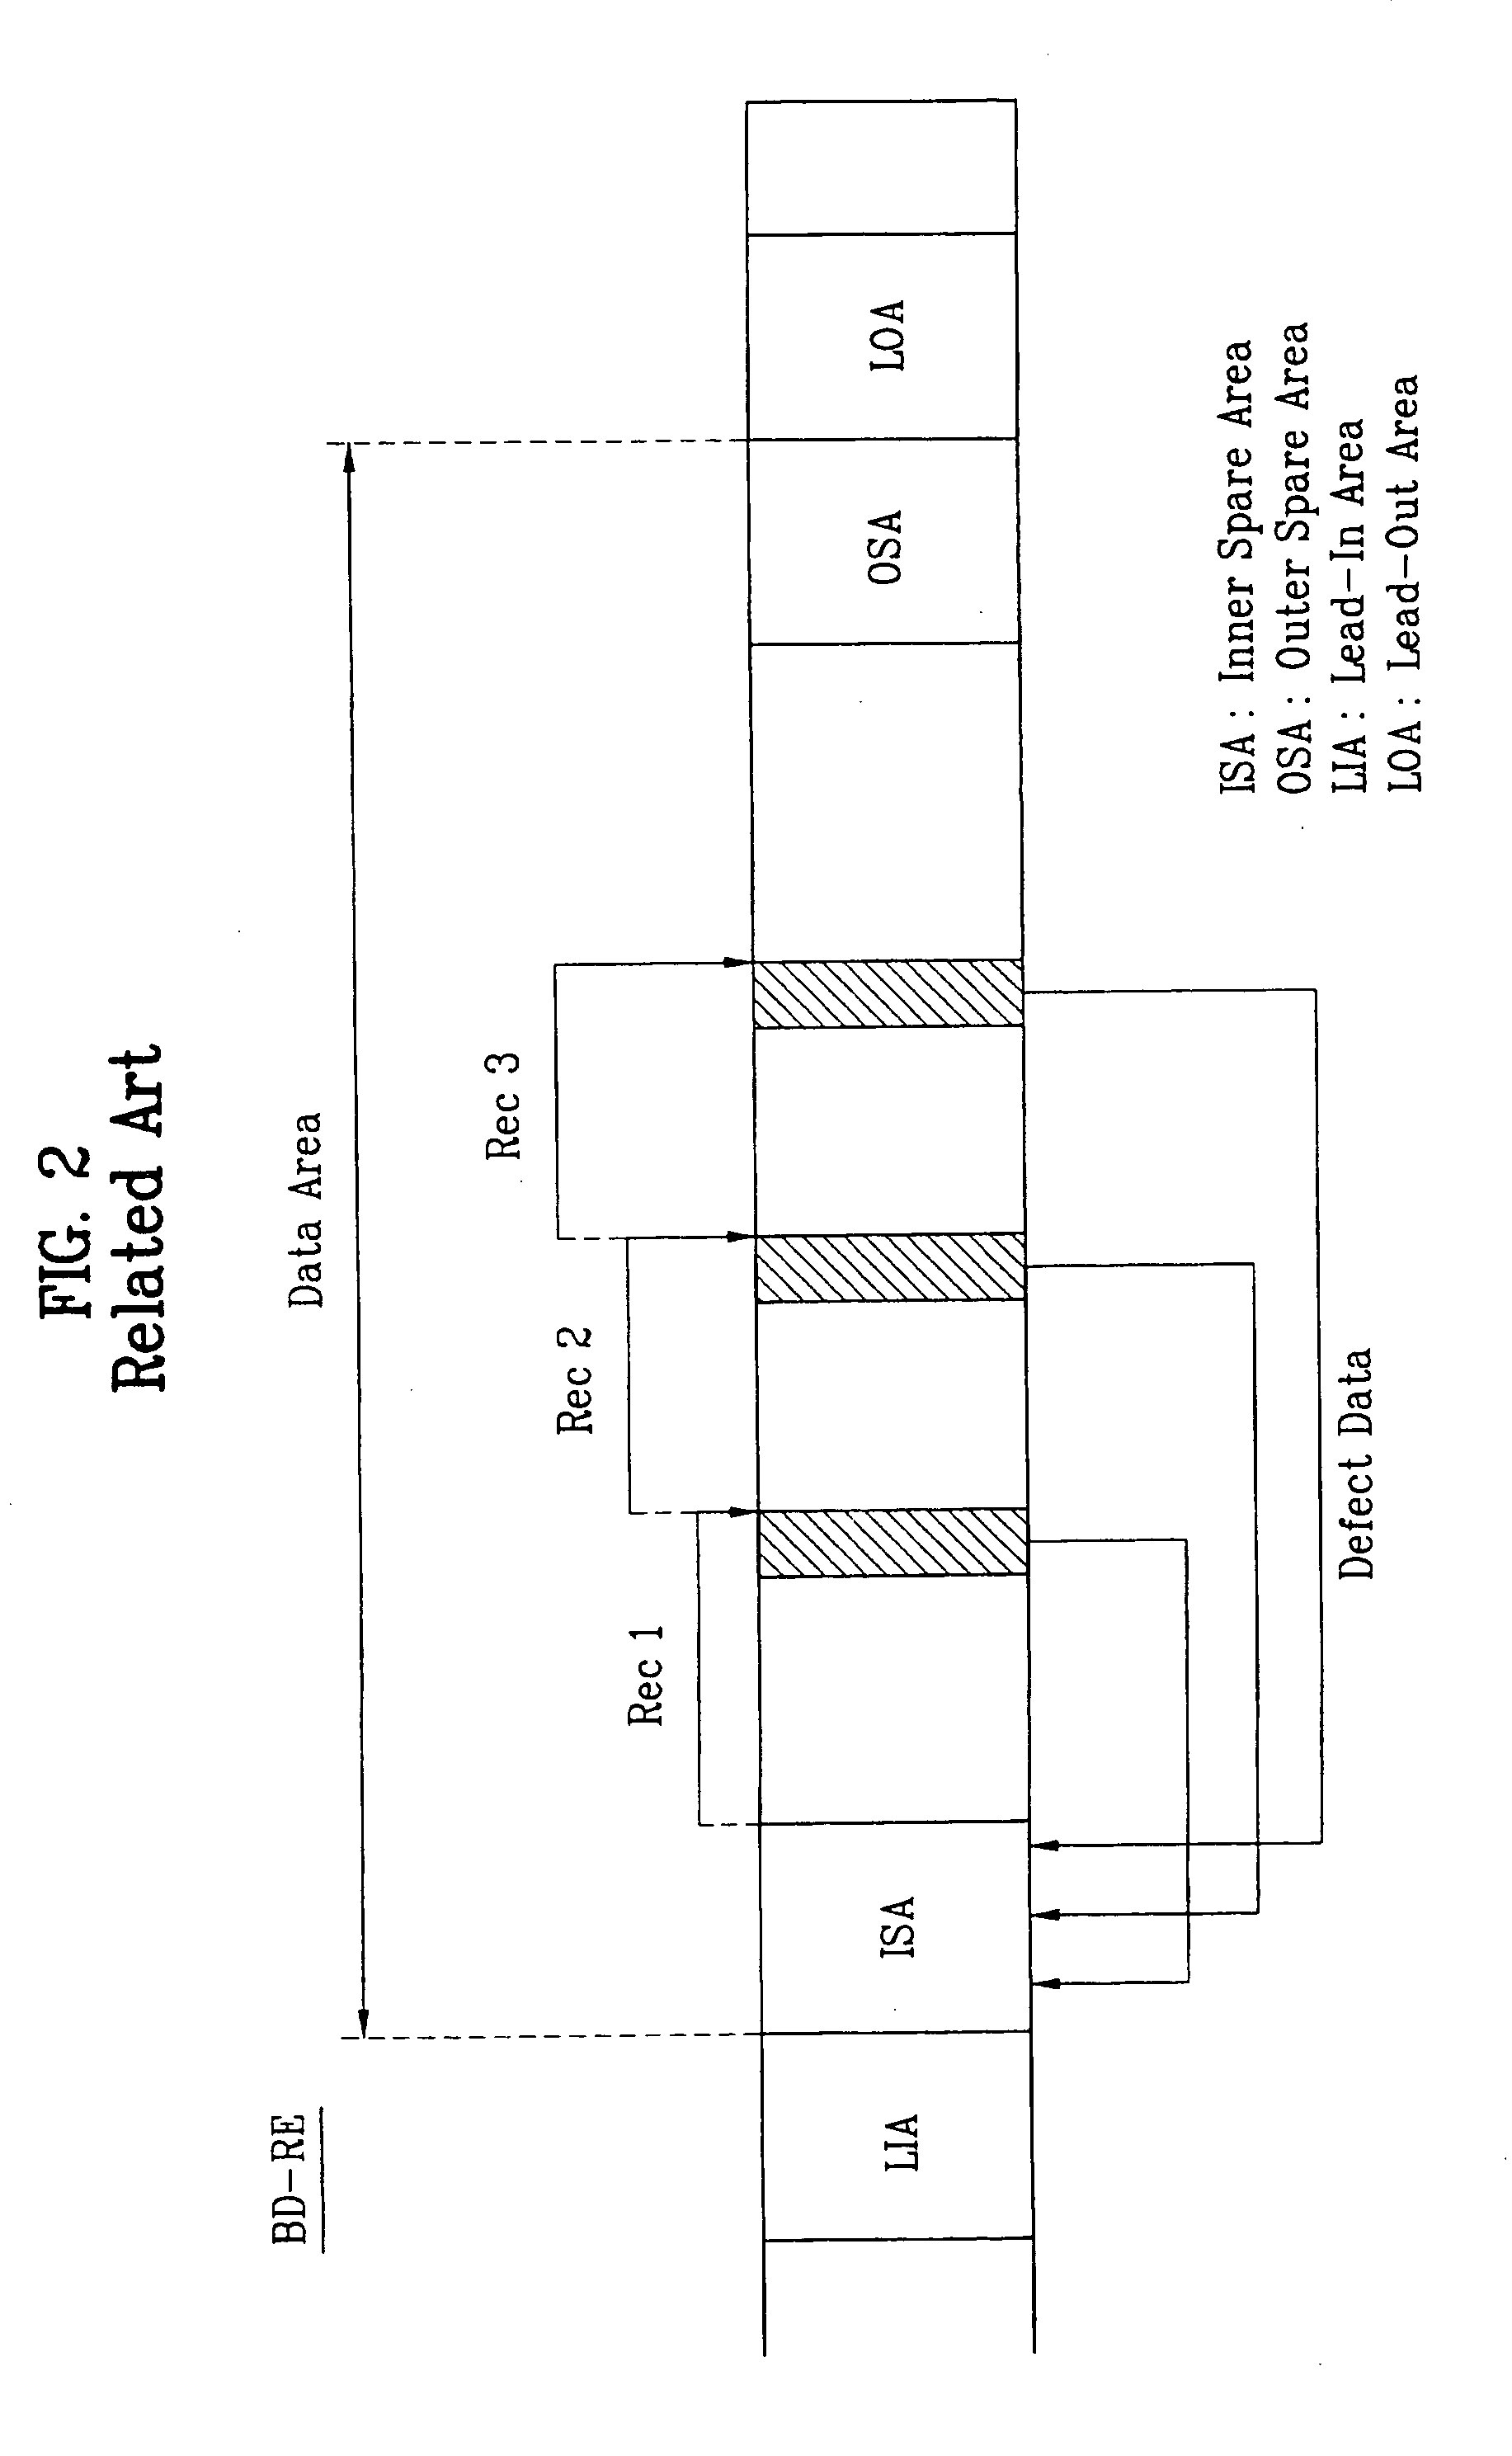 Write-once type optical disc, and method and apparatus for managing defective areas on write-once type optical disc